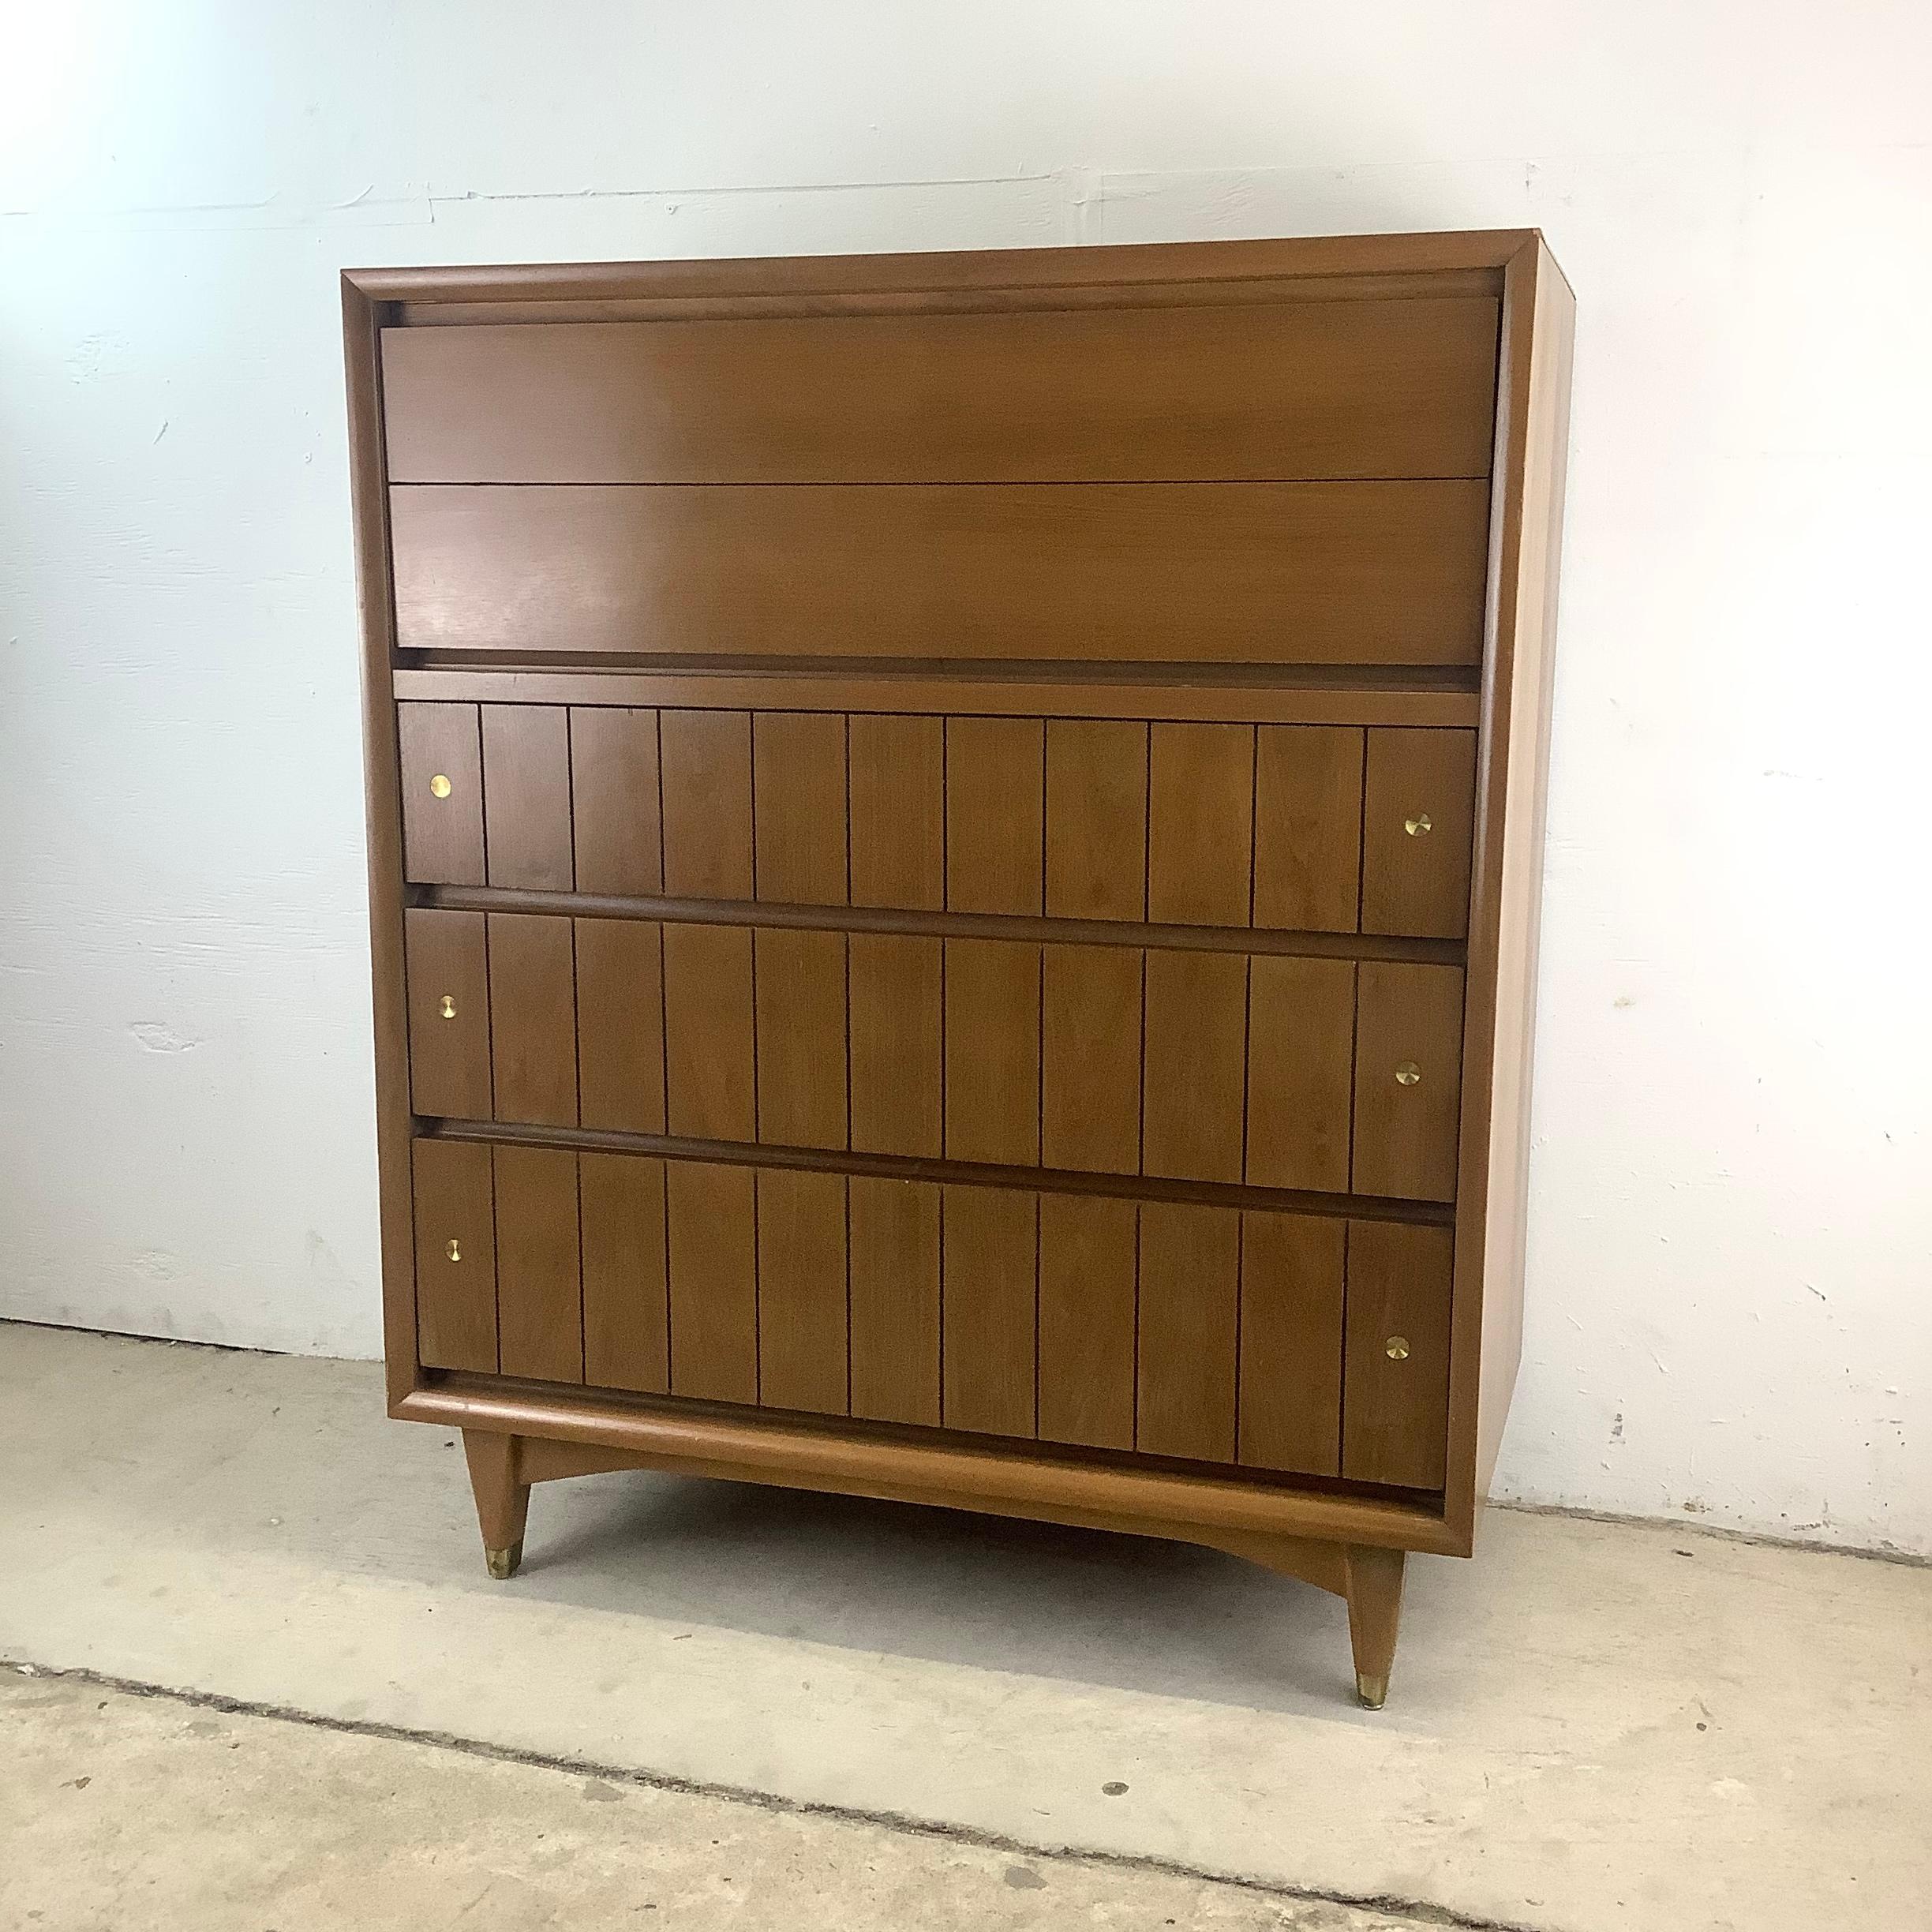 Elevate Your Space with this Mid-Century Modern Highboy Dresser by Kroehler furniture.

Introducing this Kroehler Mid-Century Highboy, a stunning piece from the 1960s that captures the essence of mid-century design. With its sleek walnut finish and